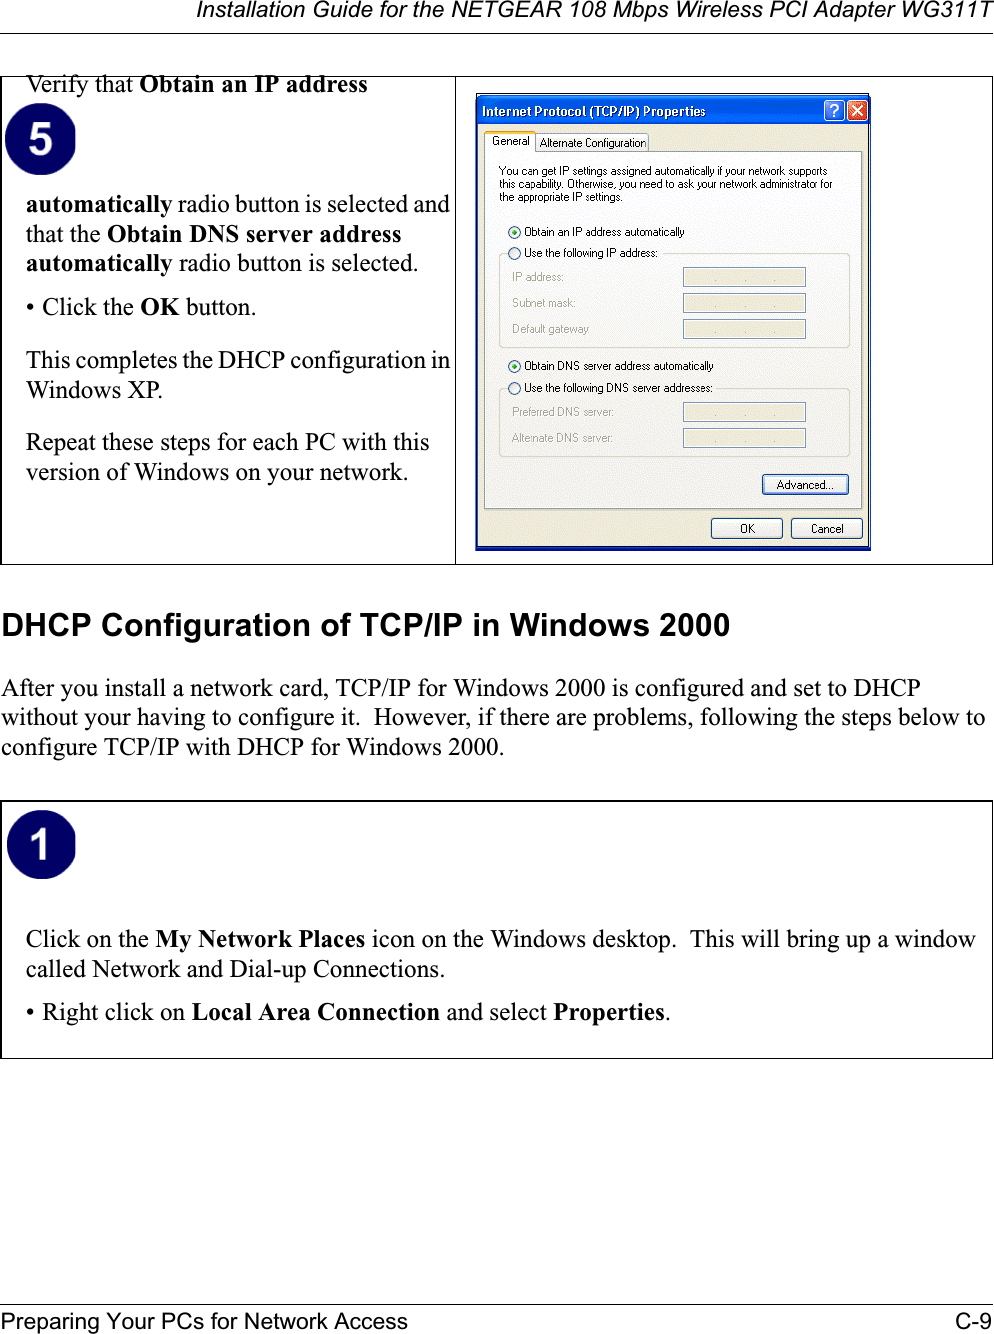 Installation Guide for the NETGEAR 108 Mbps Wireless PCI Adapter WG311TPreparing Your PCs for Network Access C-9DHCP Configuration of TCP/IP in Windows 2000 After you install a network card, TCP/IP for Windows 2000 is configured and set to DHCP without your having to configure it.  However, if there are problems, following the steps below to configure TCP/IP with DHCP for Windows 2000.Verify that Obtain an IP address automatically radio button is selected and that the Obtain DNS server address automatically radio button is selected.• Click the OK button.This completes the DHCP configuration in Windows XP.Repeat these steps for each PC with this version of Windows on your network.Click on the My Network Places icon on the Windows desktop.  This will bring up a window called Network and Dial-up Connections.• Right click on Local Area Connection and select Properties.